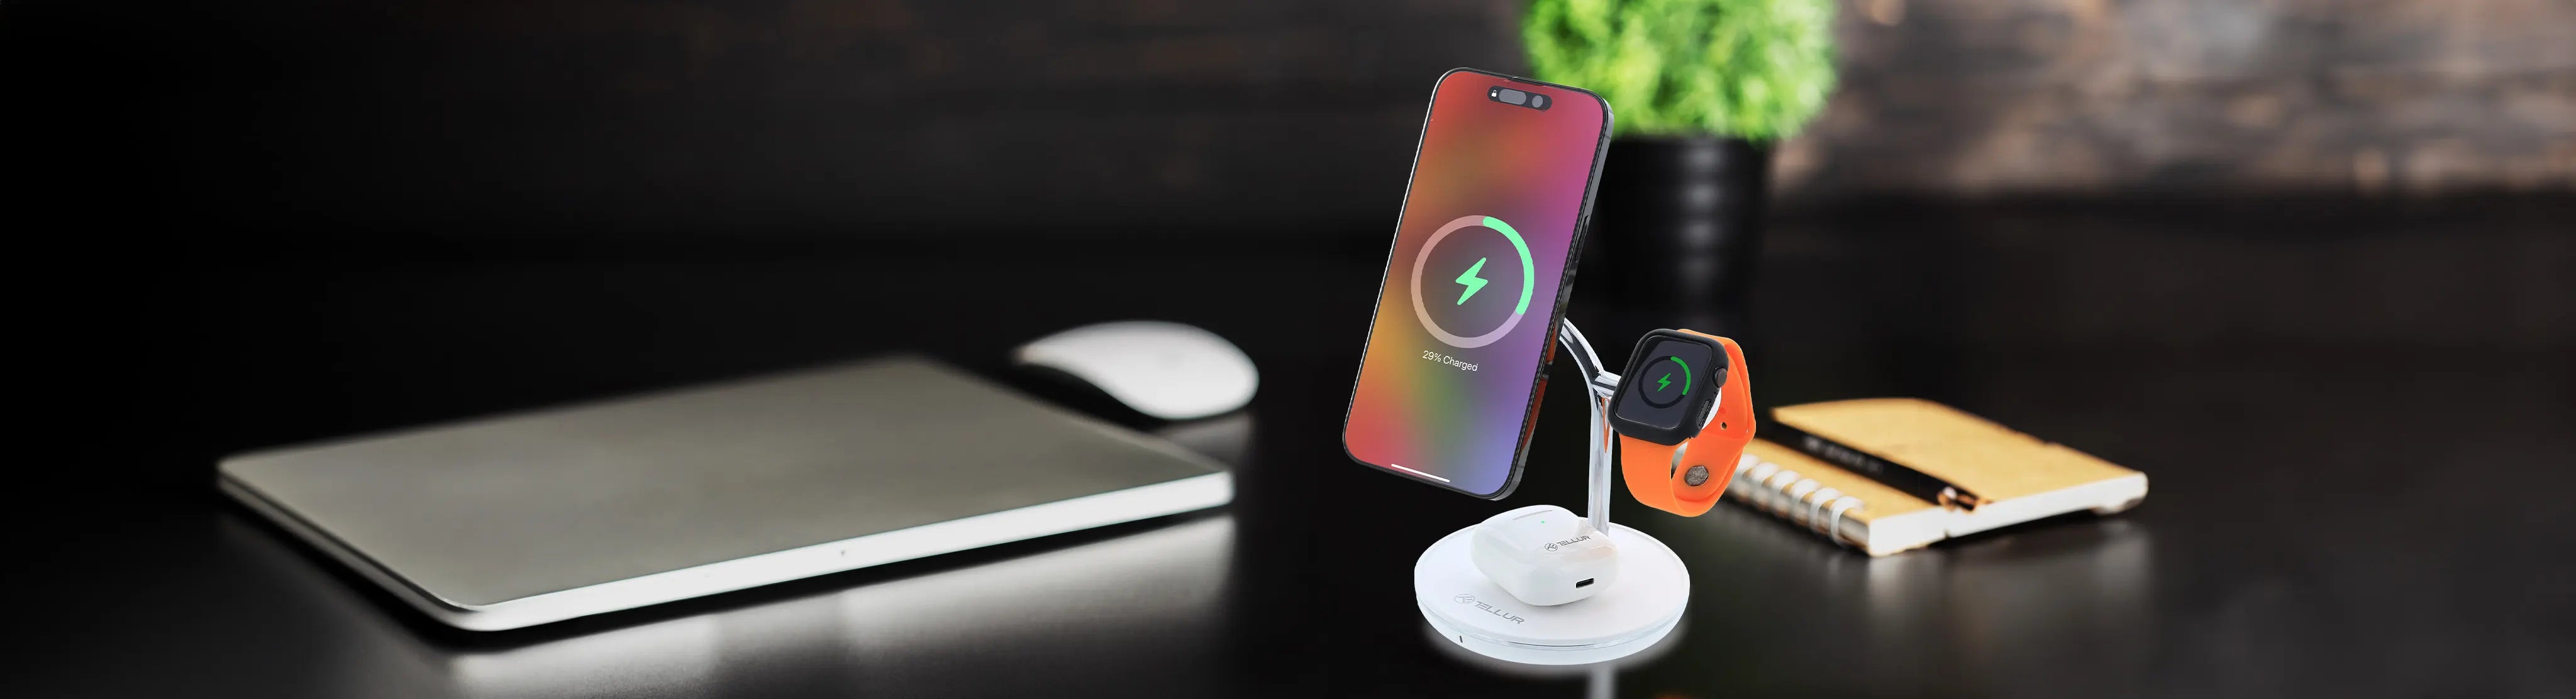 Experience the future of charging with Tellur's Wireless Chargers, featuring sleek designs with MagSafe compatibility and multi-functional convenience